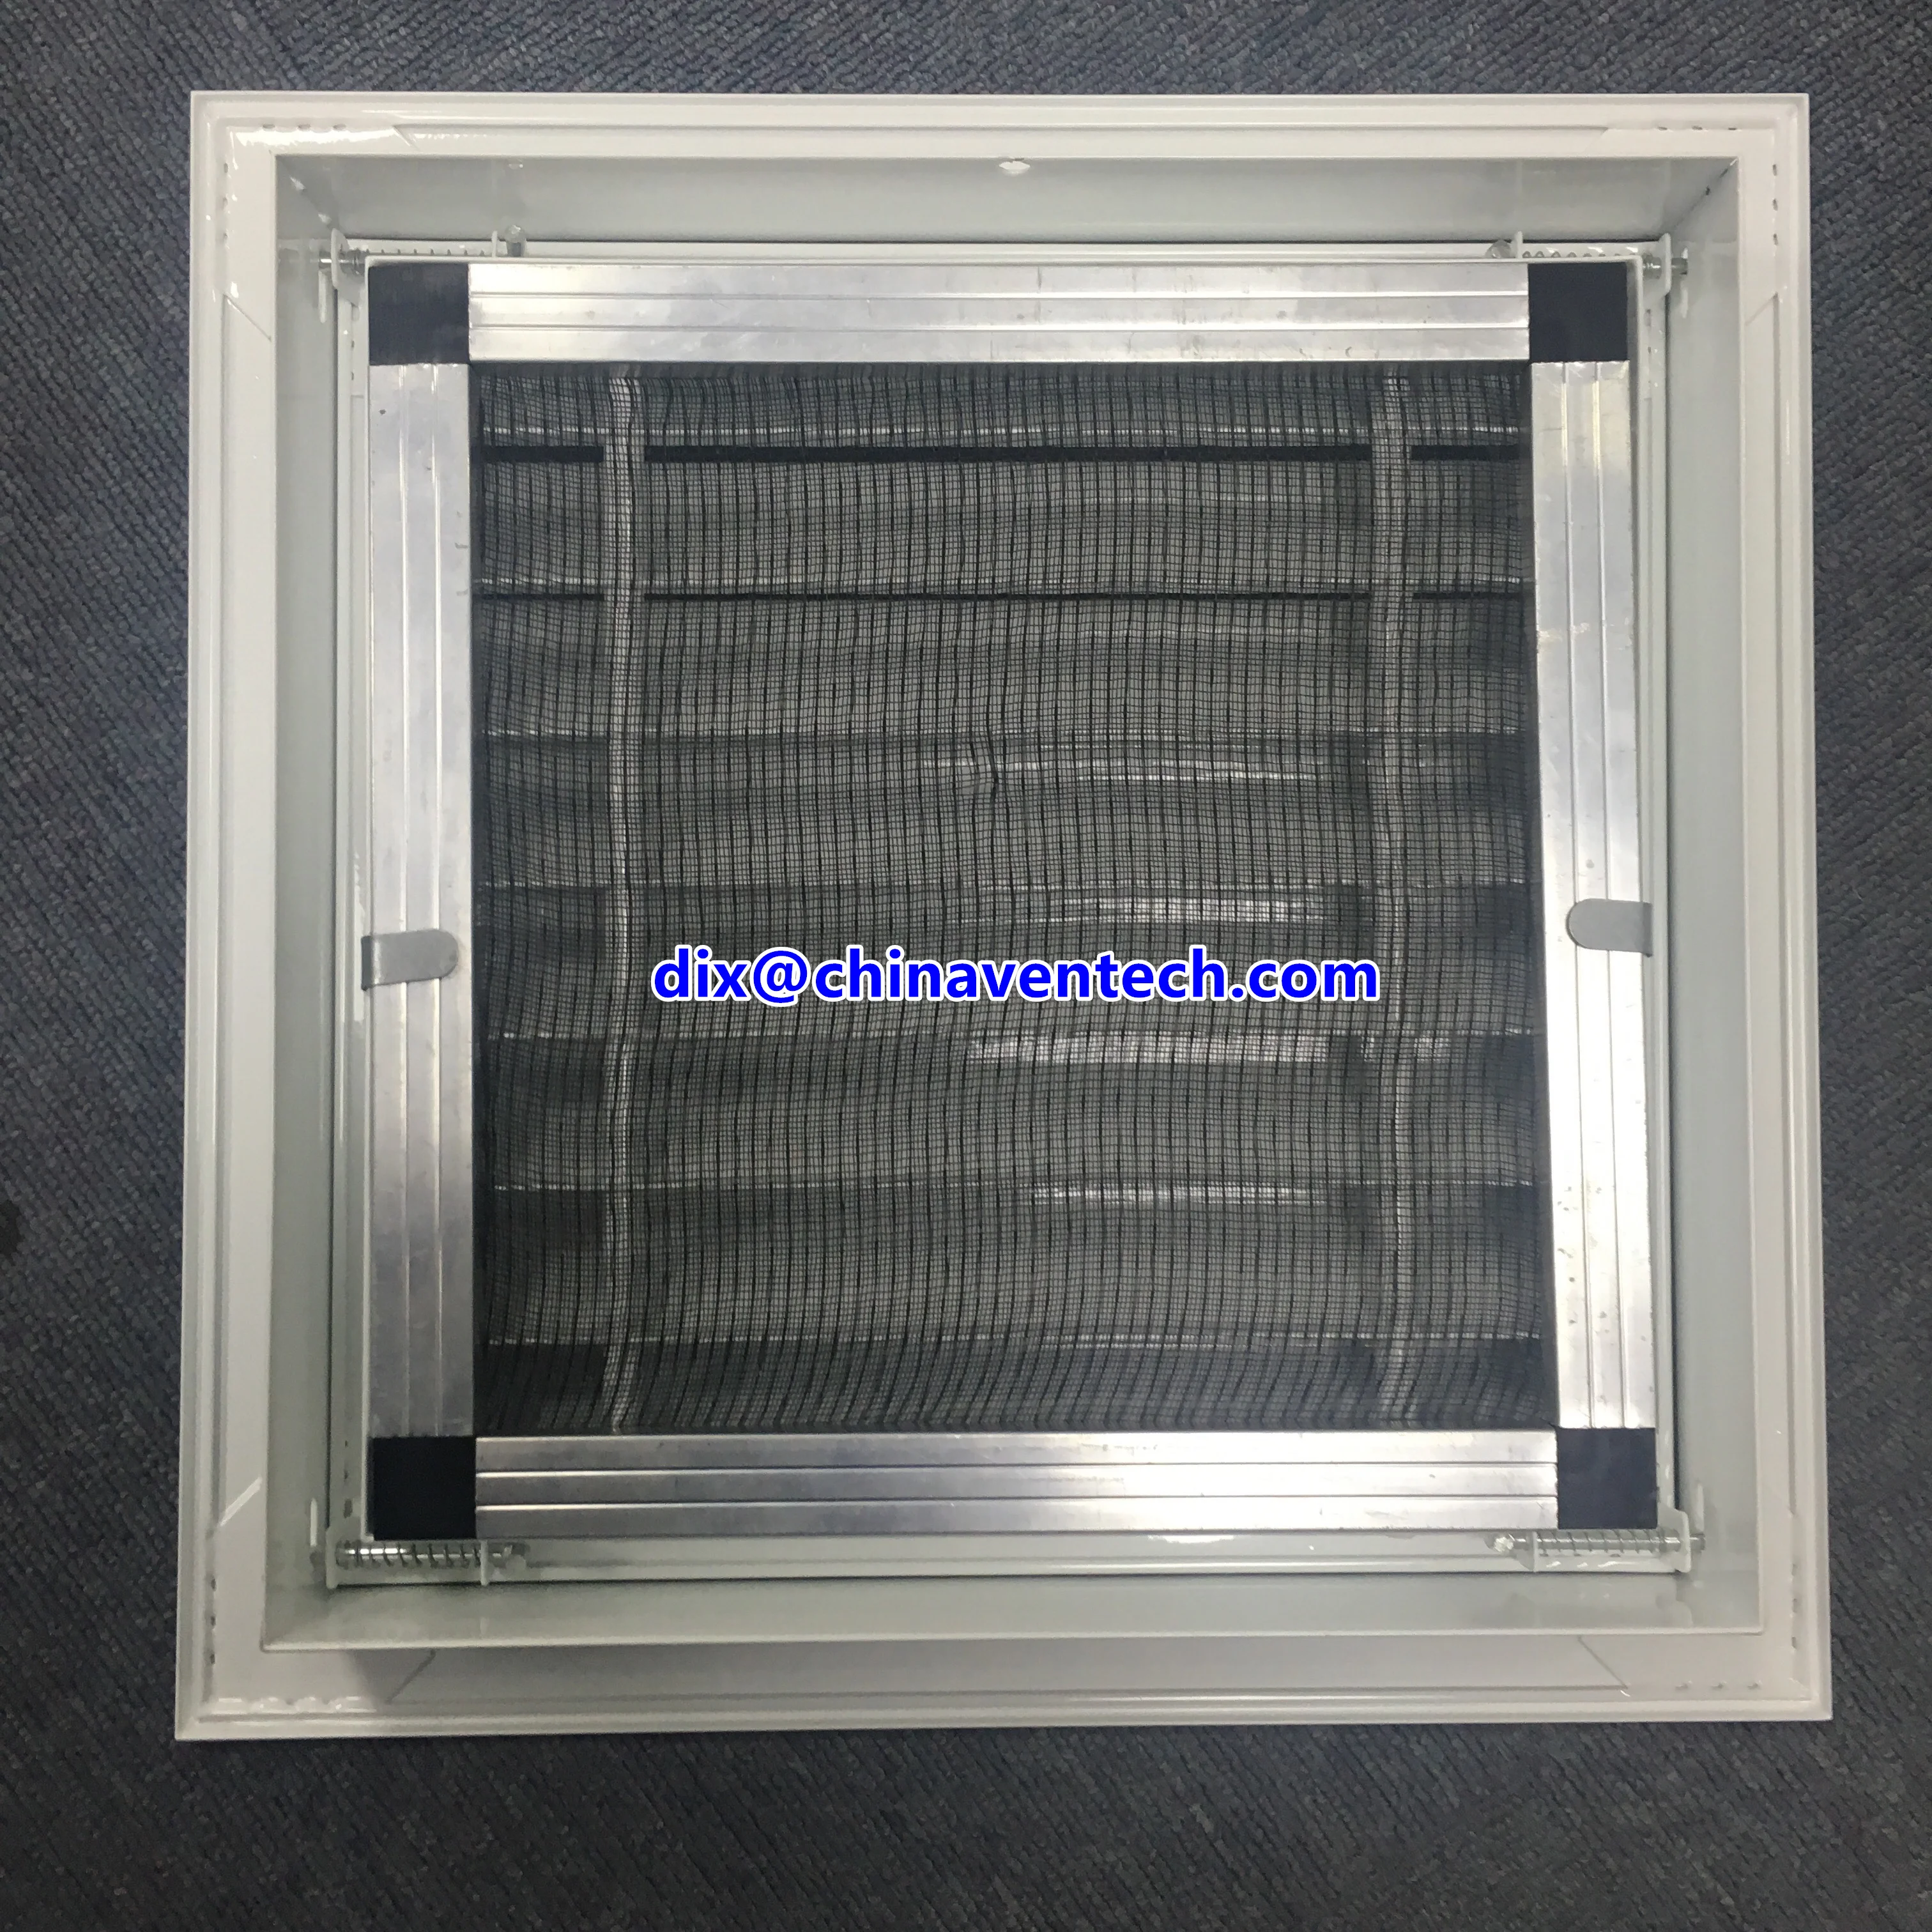 Hvac ventilation access door type hinged return air grille with filter